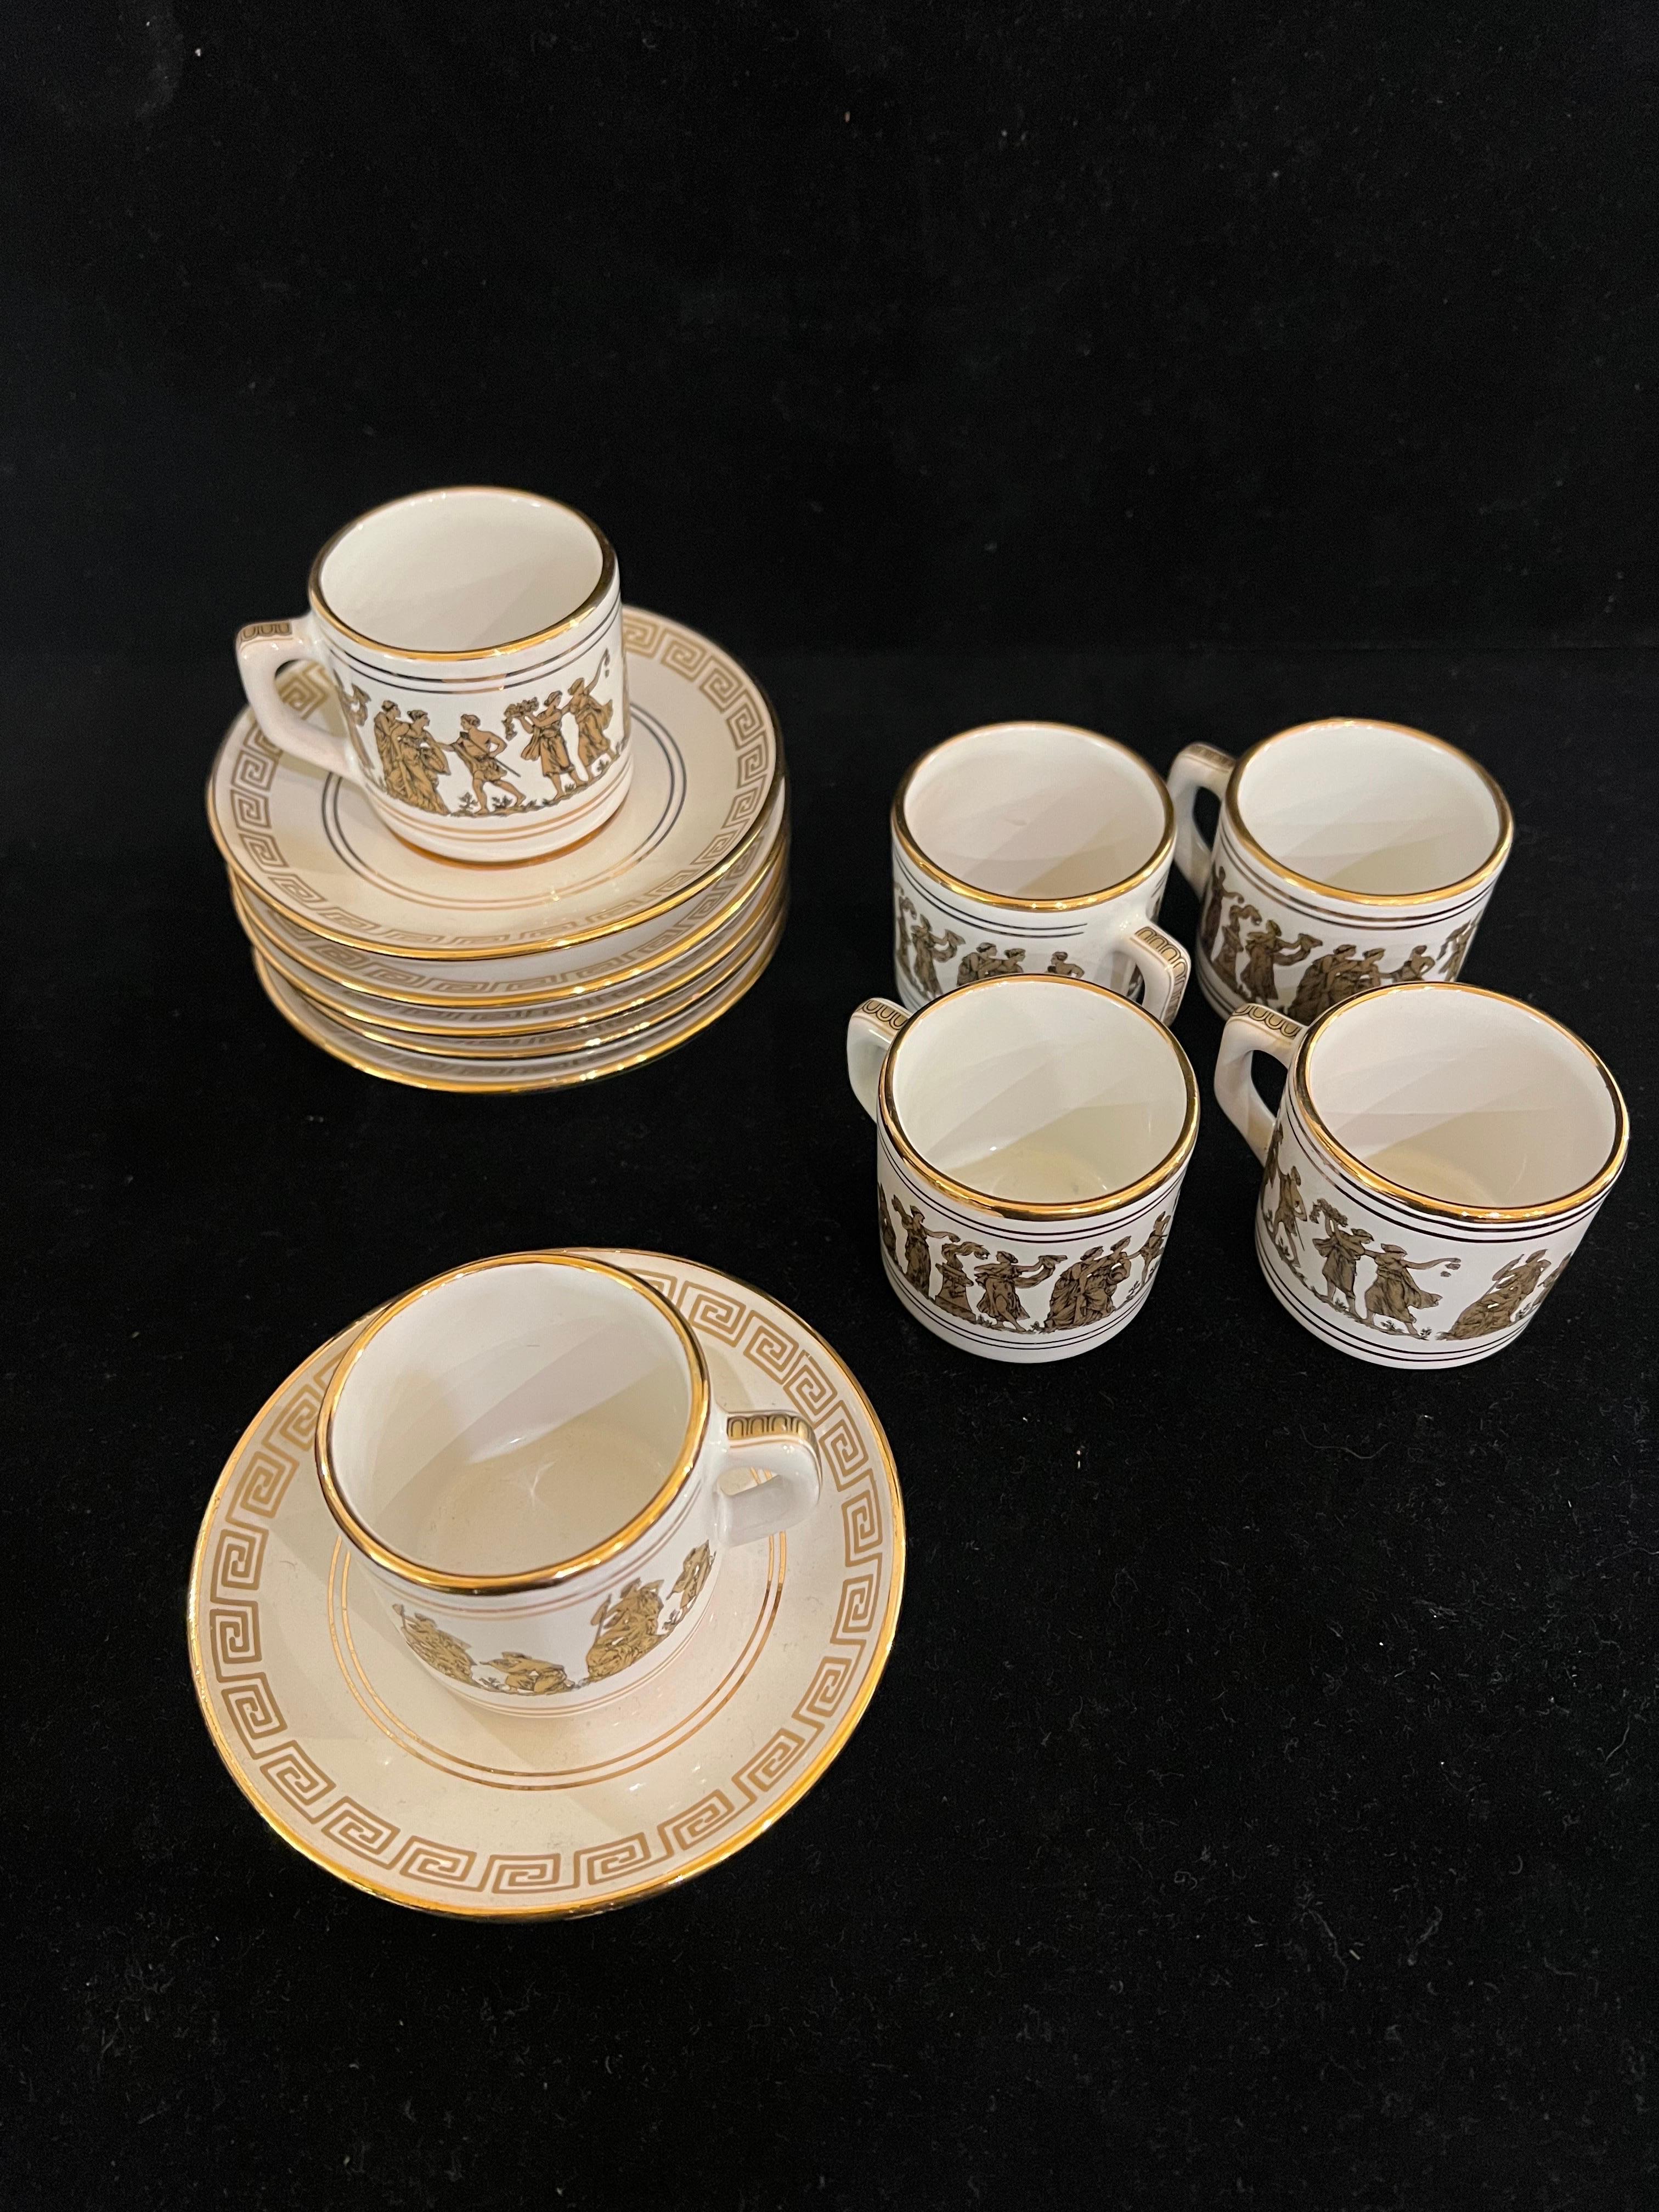 24 K Hand Painted Set of 6 Espresso Cups & Saucers Greek Key Pattern In Excellent Condition For Sale In San Diego, CA